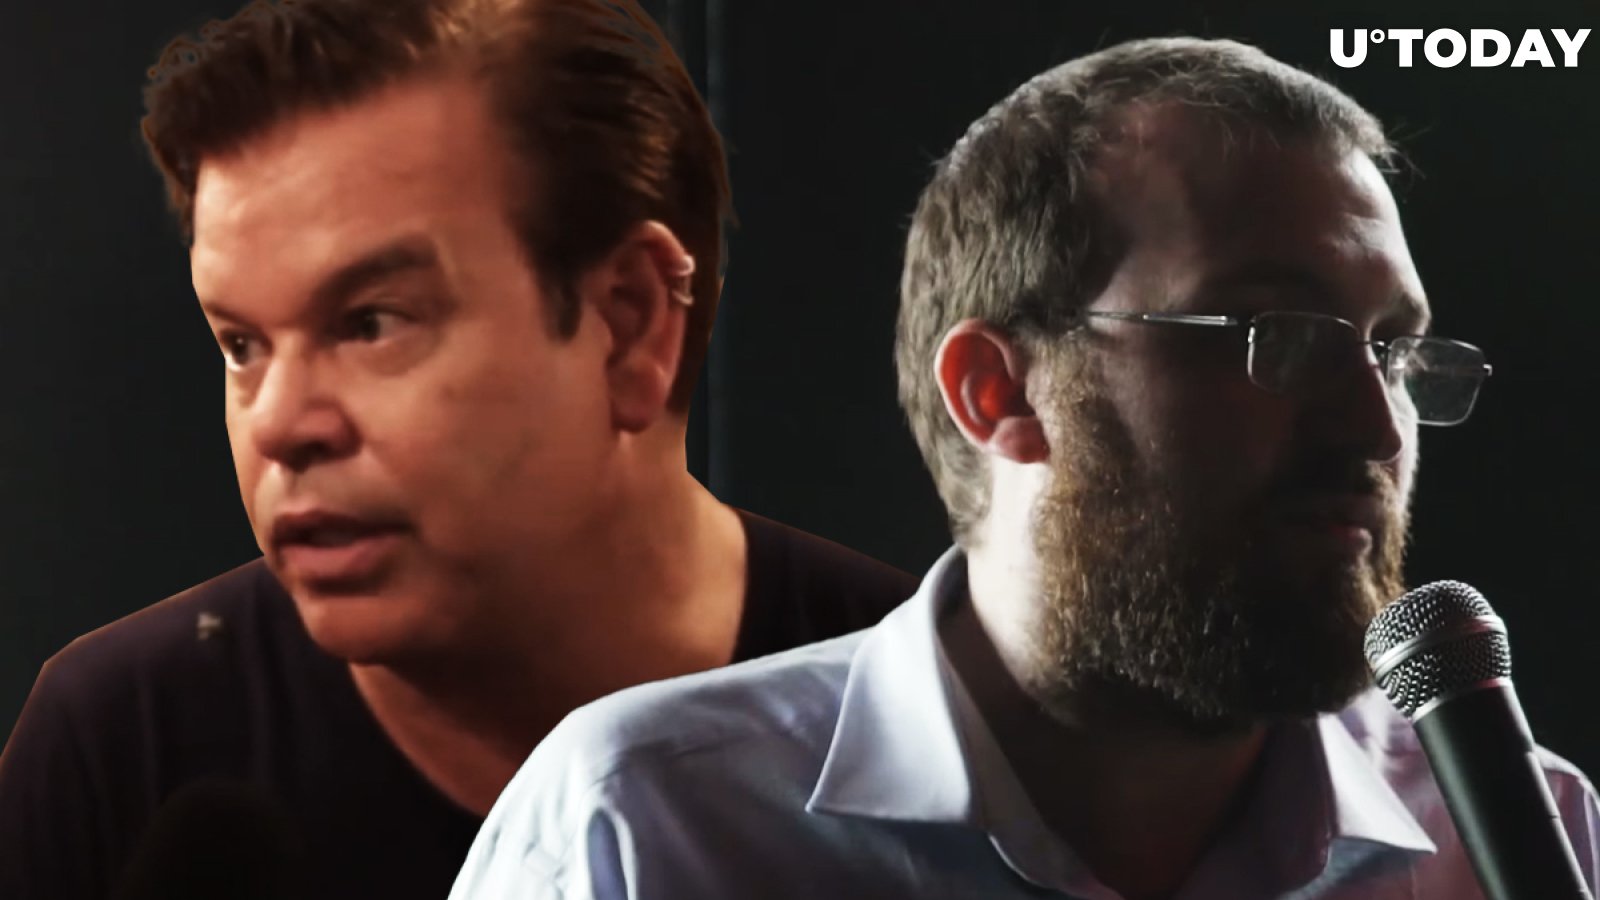 Charles Hoskinson Working to Launch New Paul Oakenfold Album on Cardano